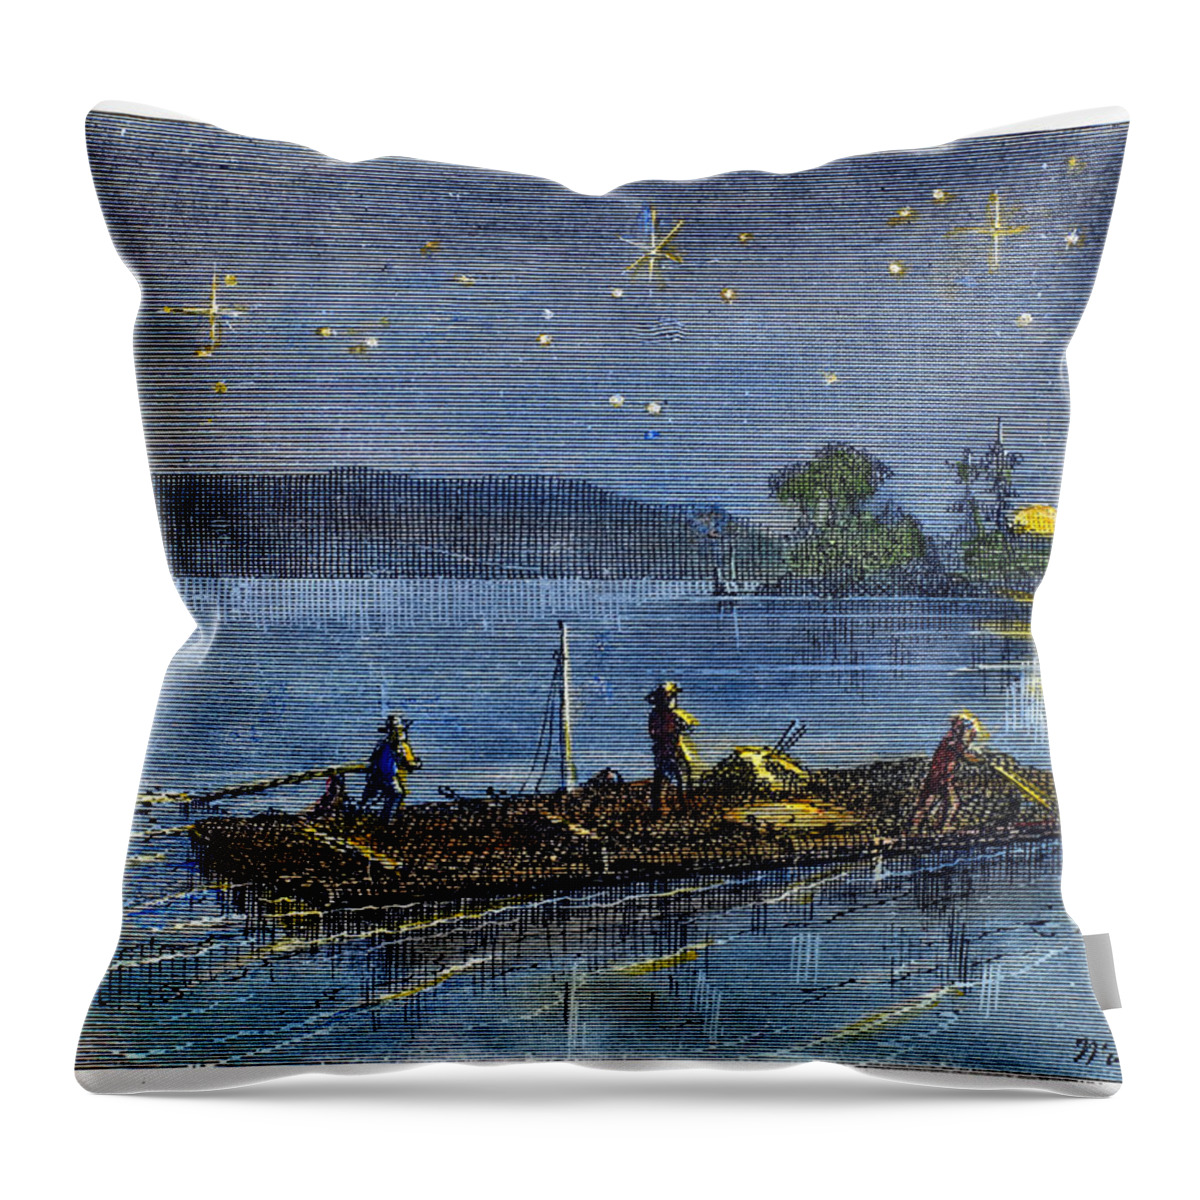 1876 Throw Pillow featuring the photograph Clemens: Tom Sawyer #2 by Granger